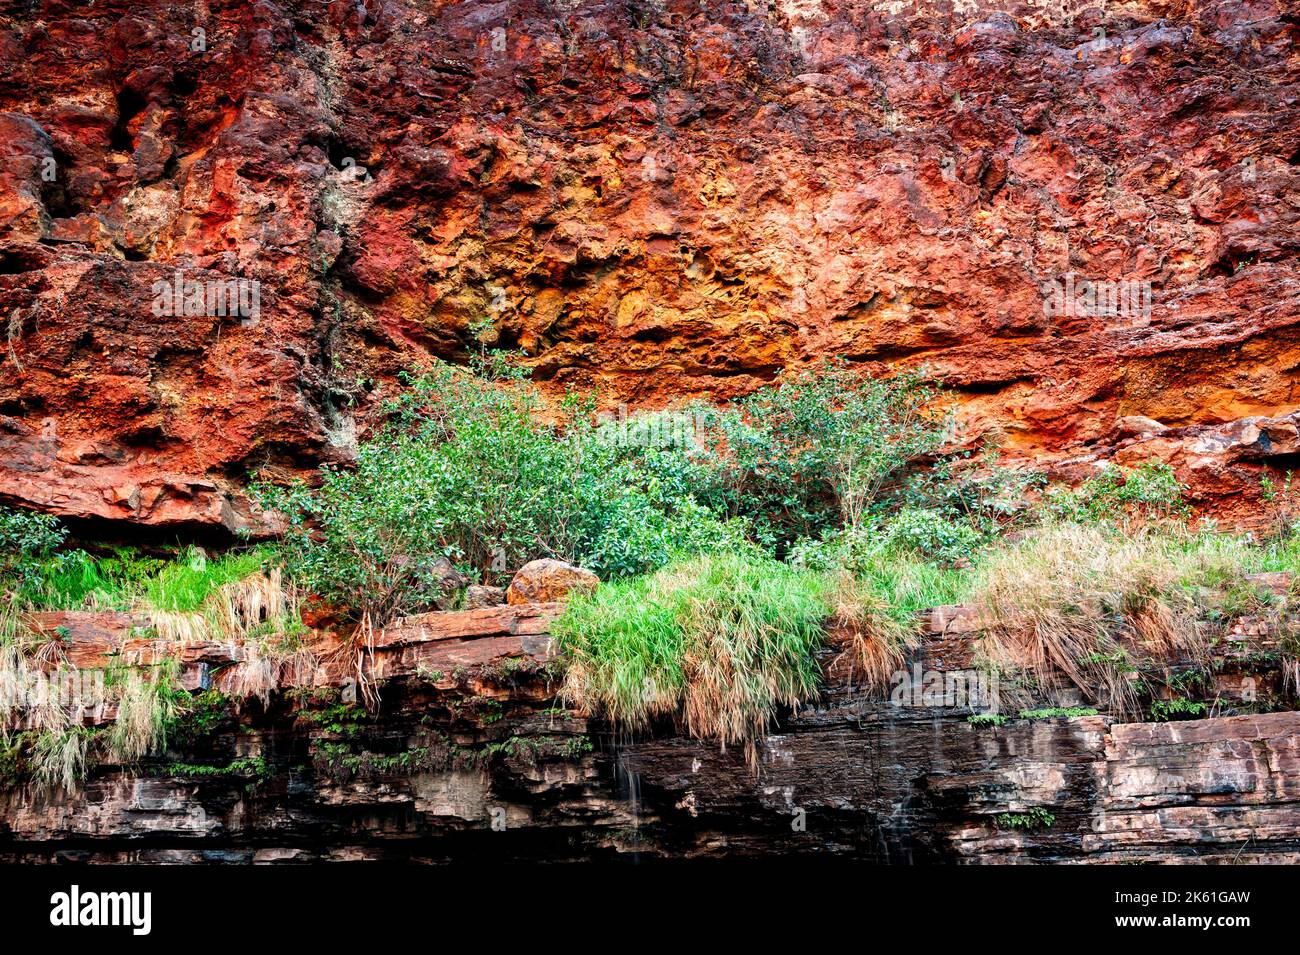 Red cliff and green grass in Karijini's Dales Gorge. Stock Photo